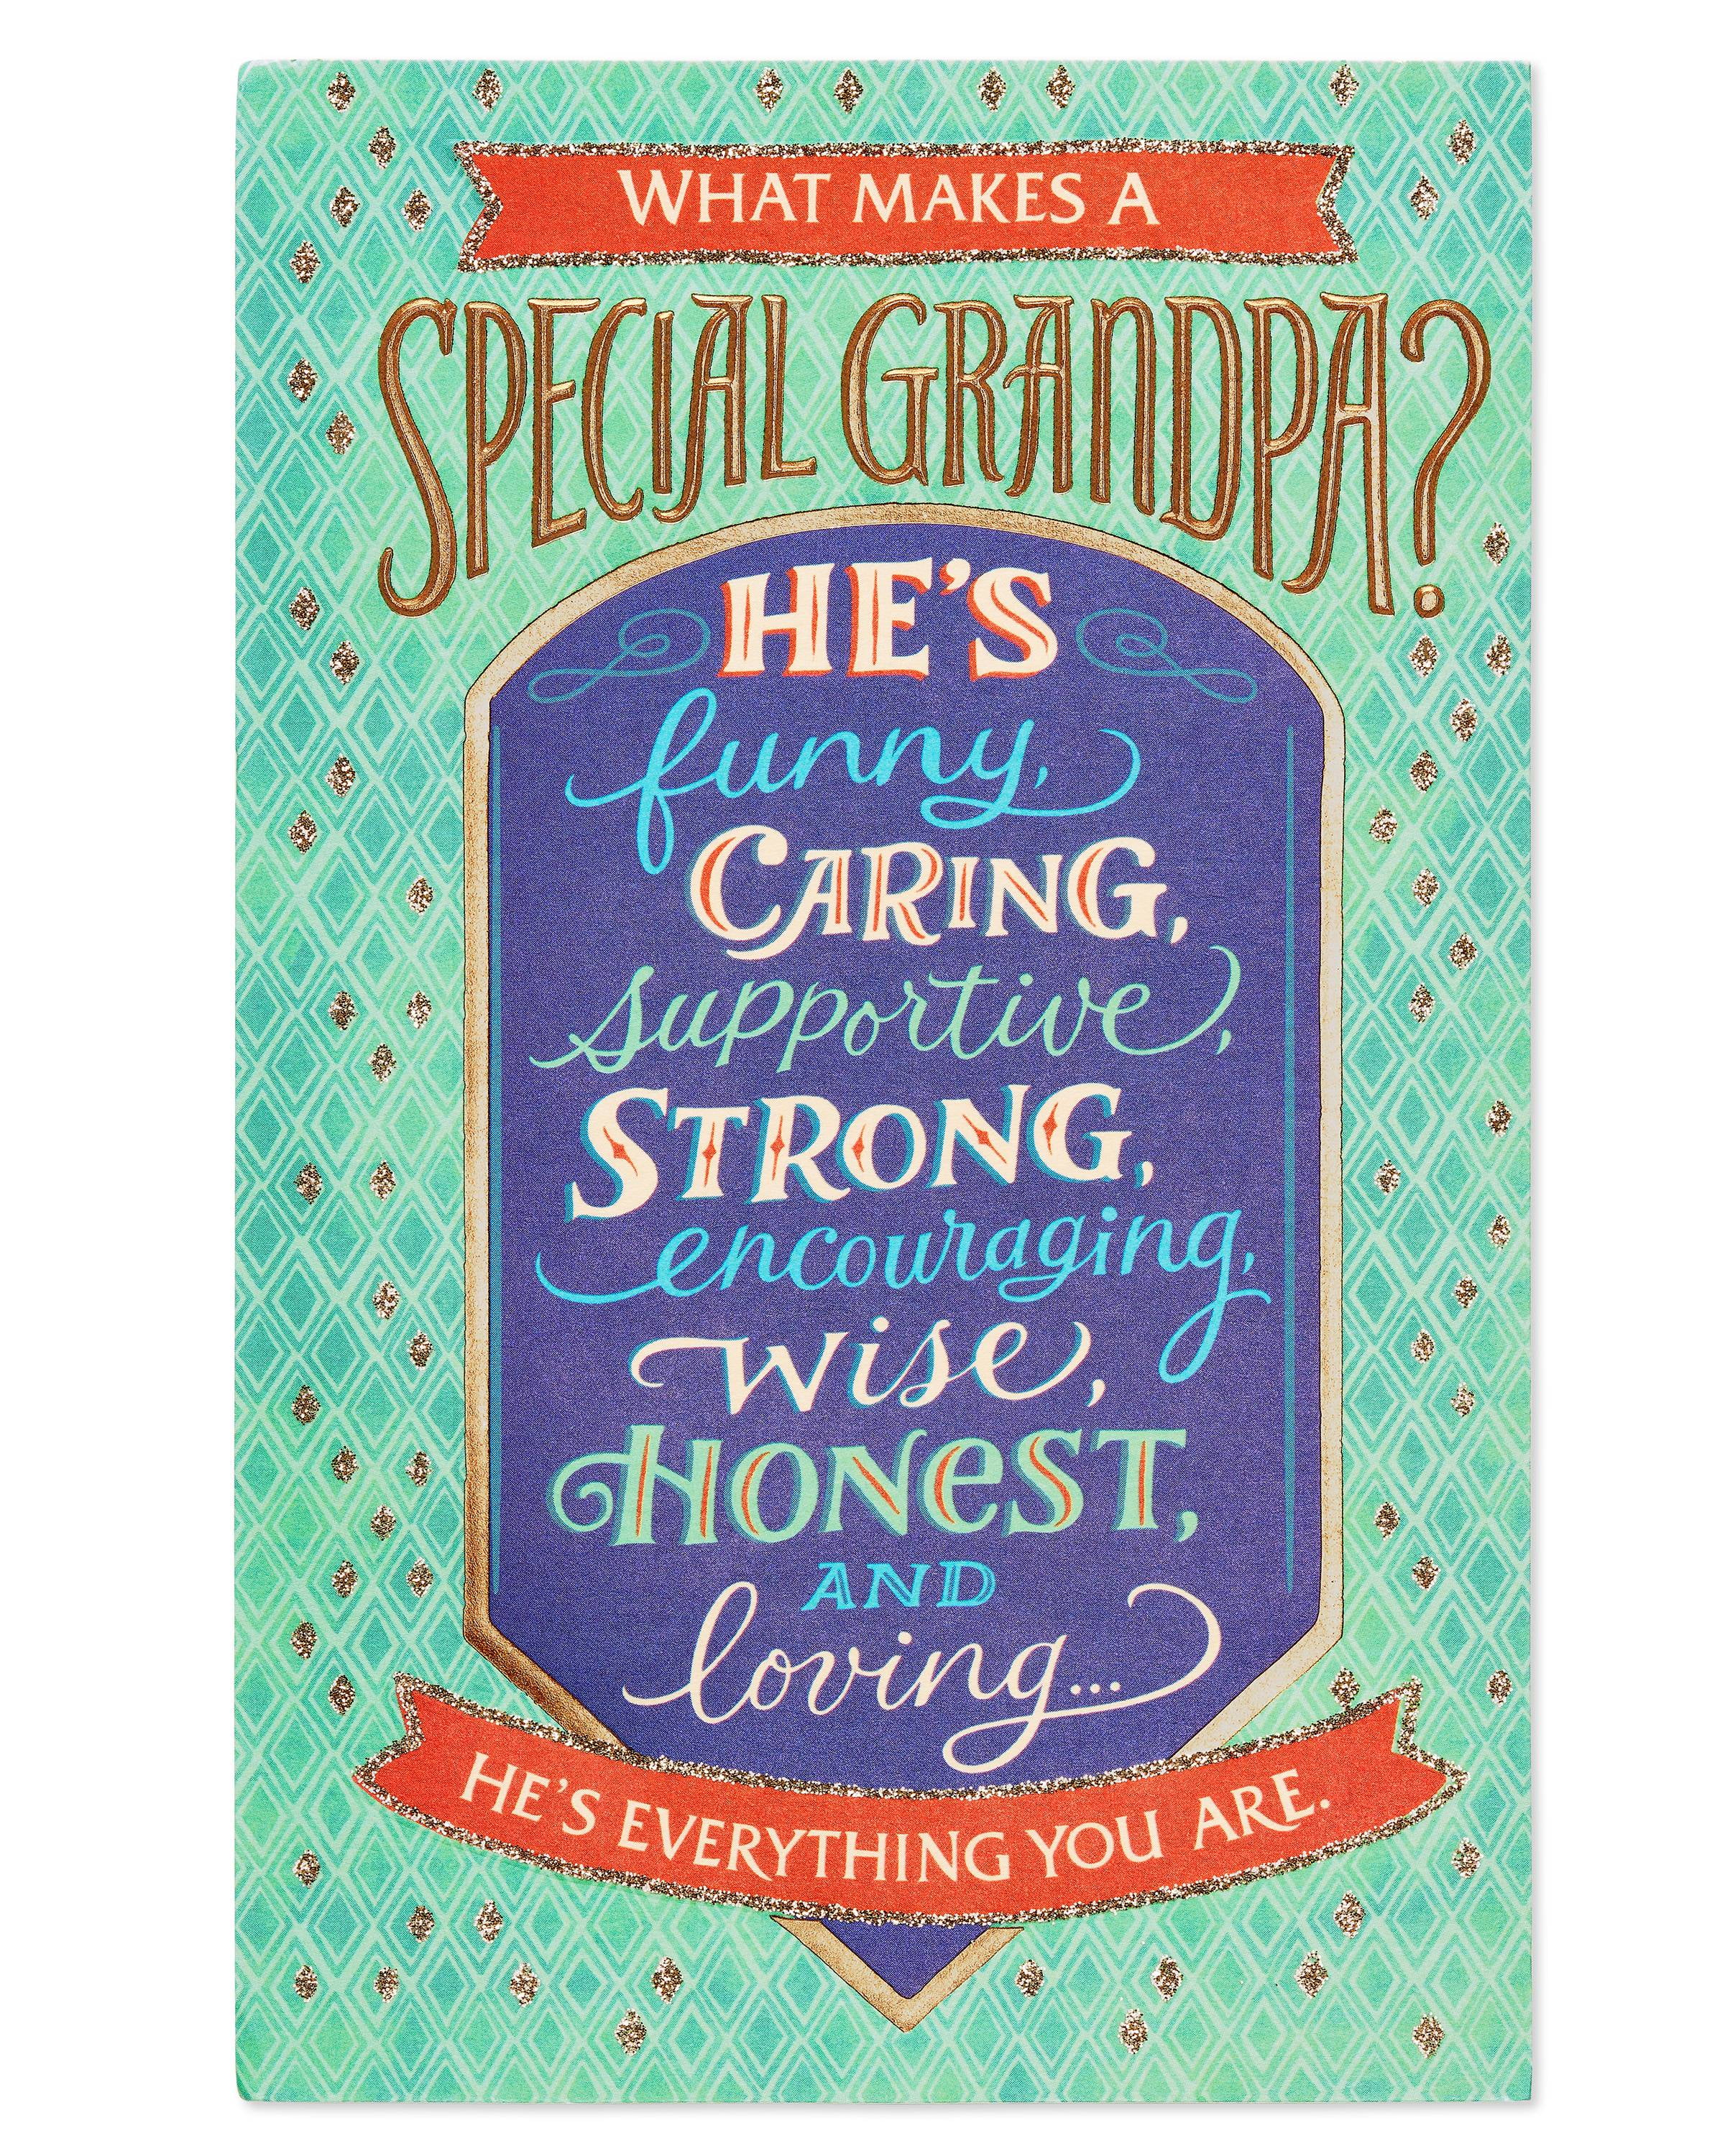 american-greetings-special-birthday-card-for-grandpa-with-glitter